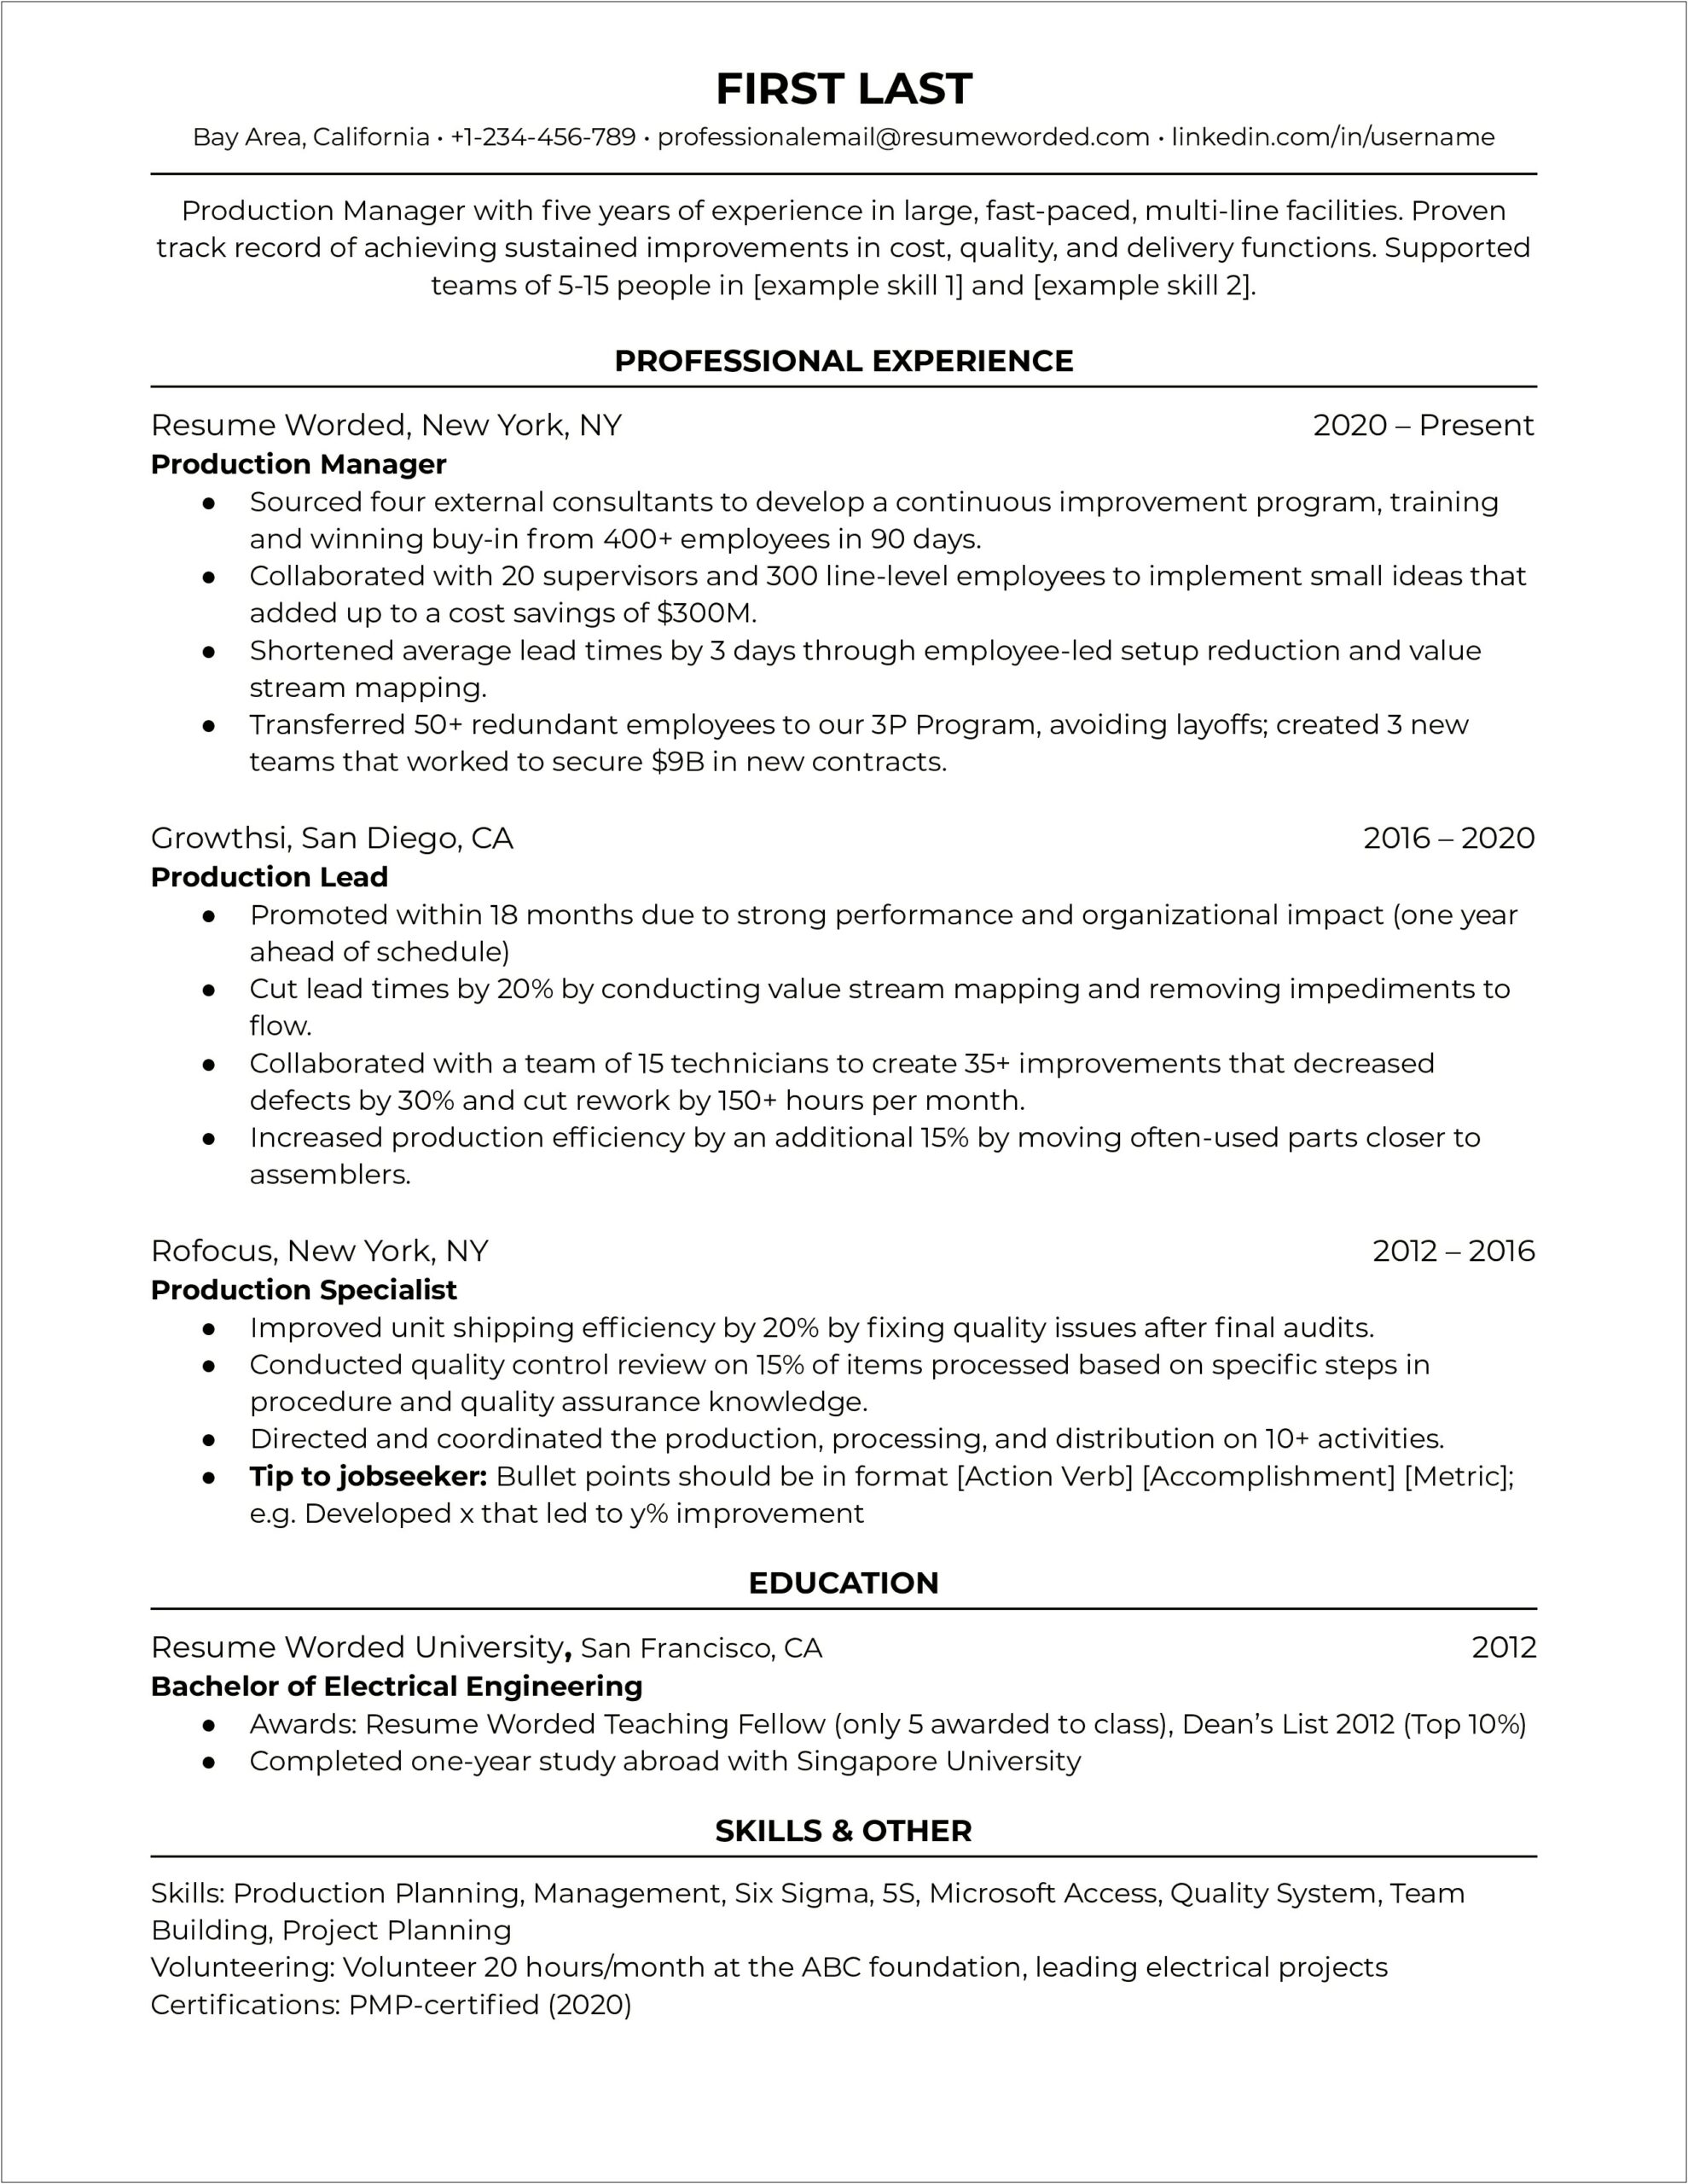 Resume Summary Of Qualifications Director Of Support